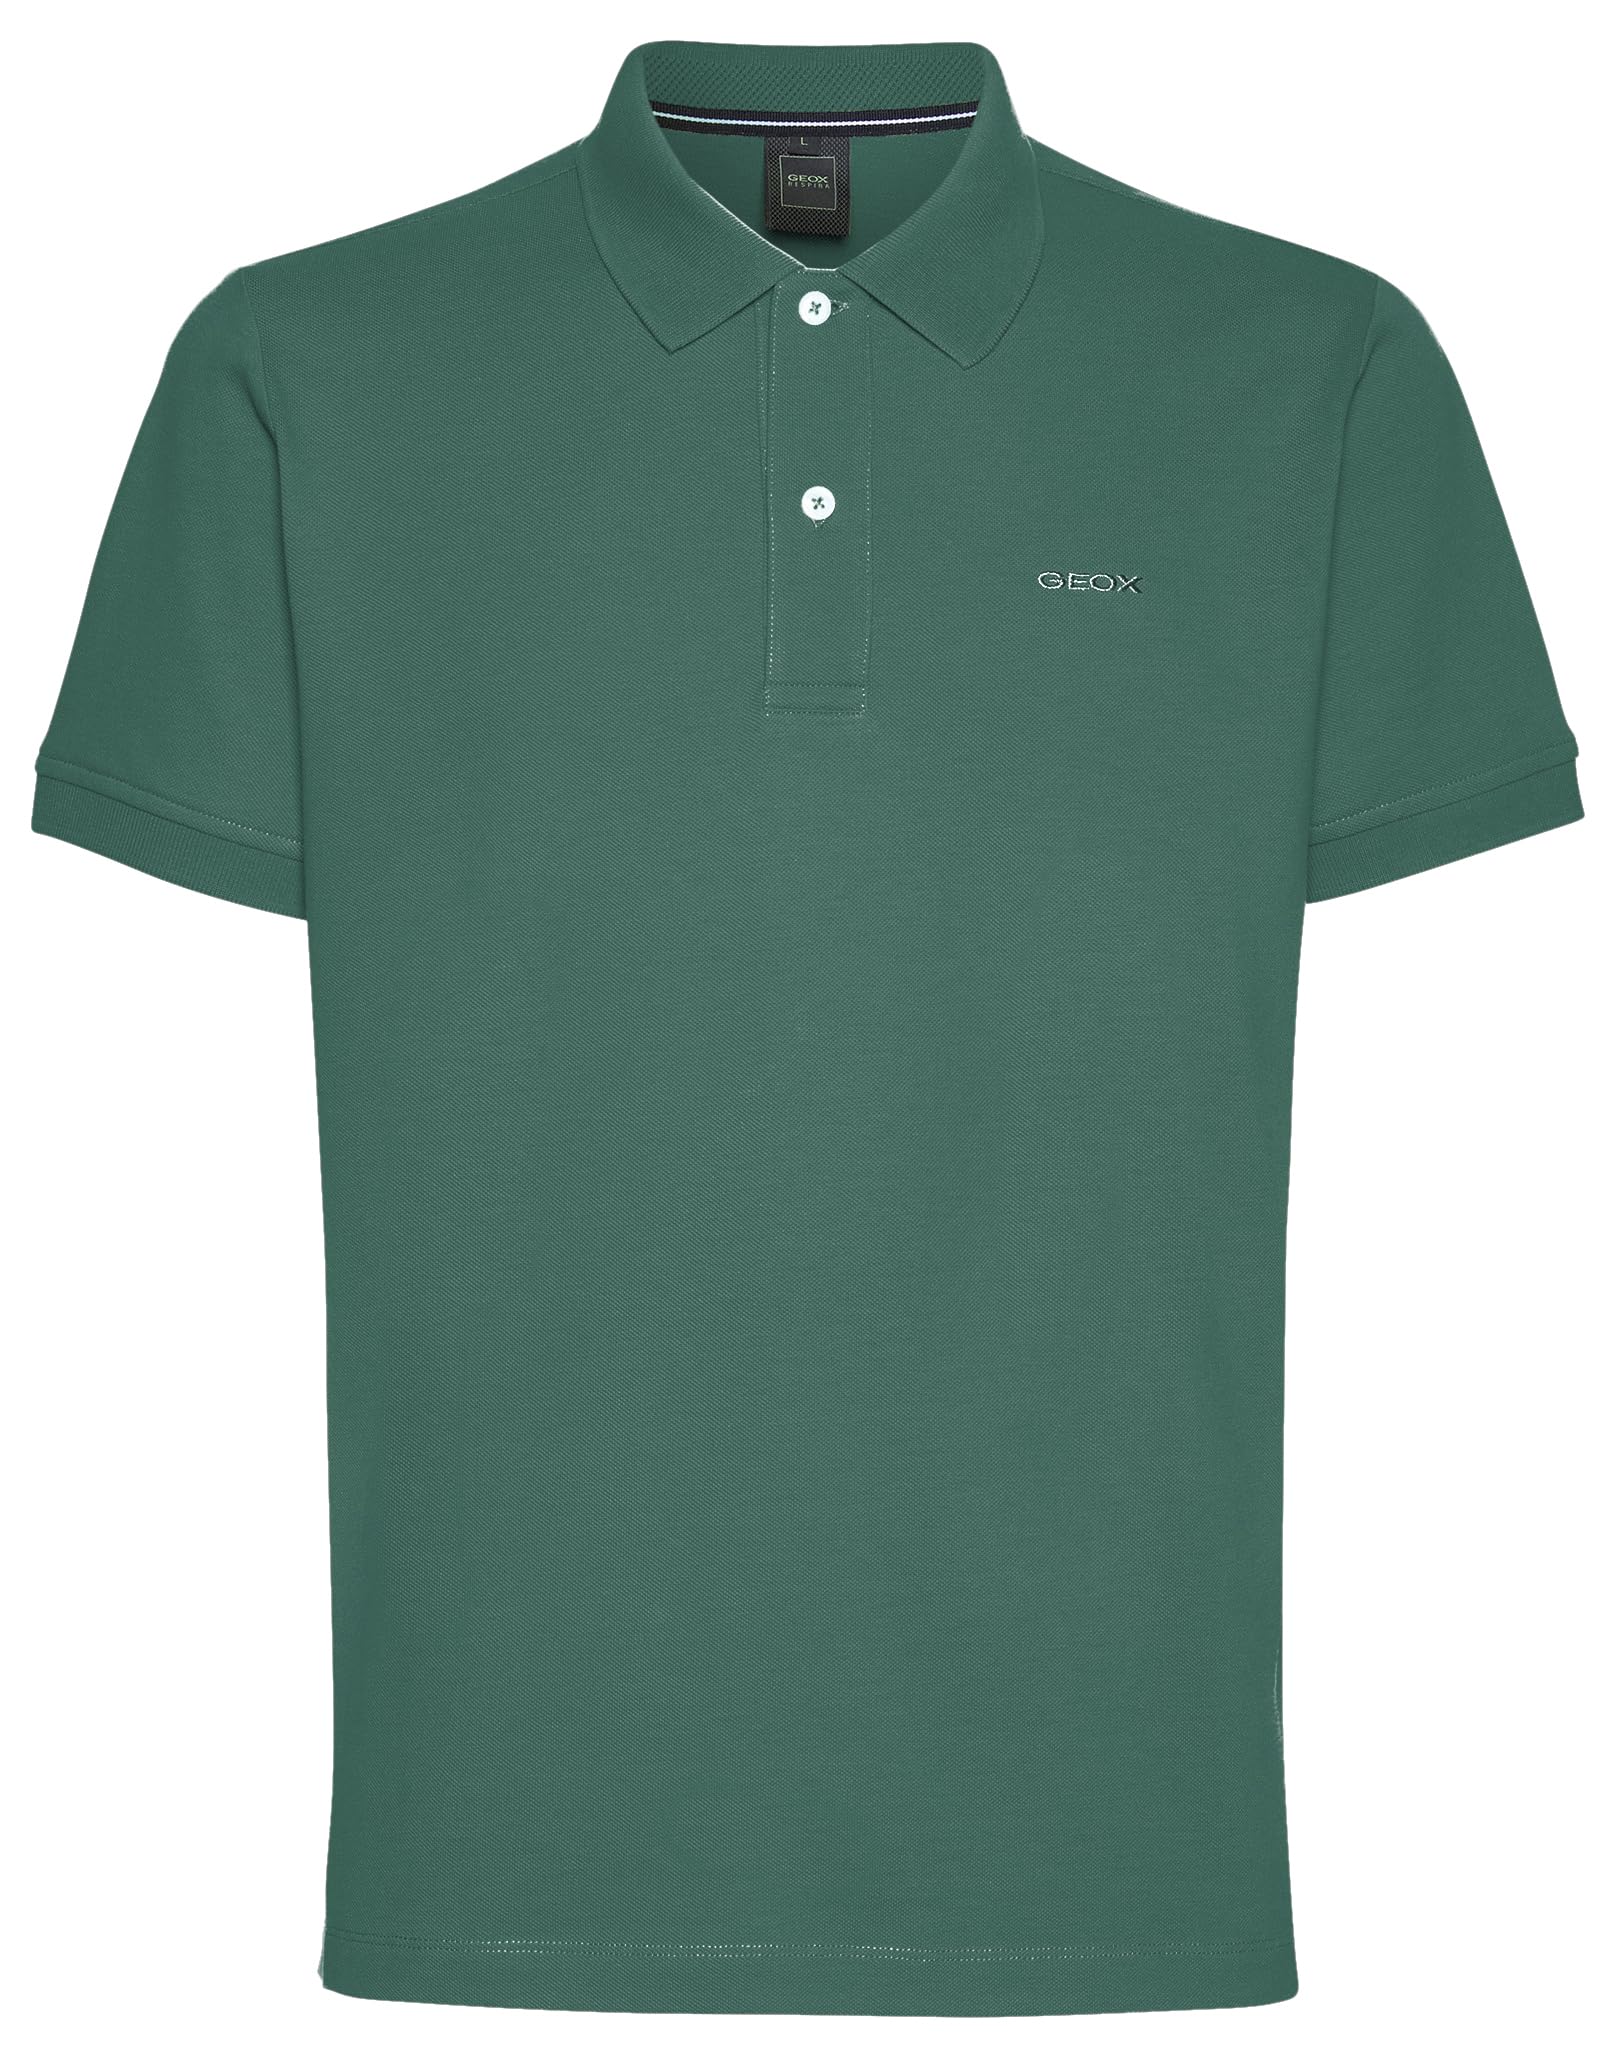 Geox Men's M Polo Shirt, Forest Green, S